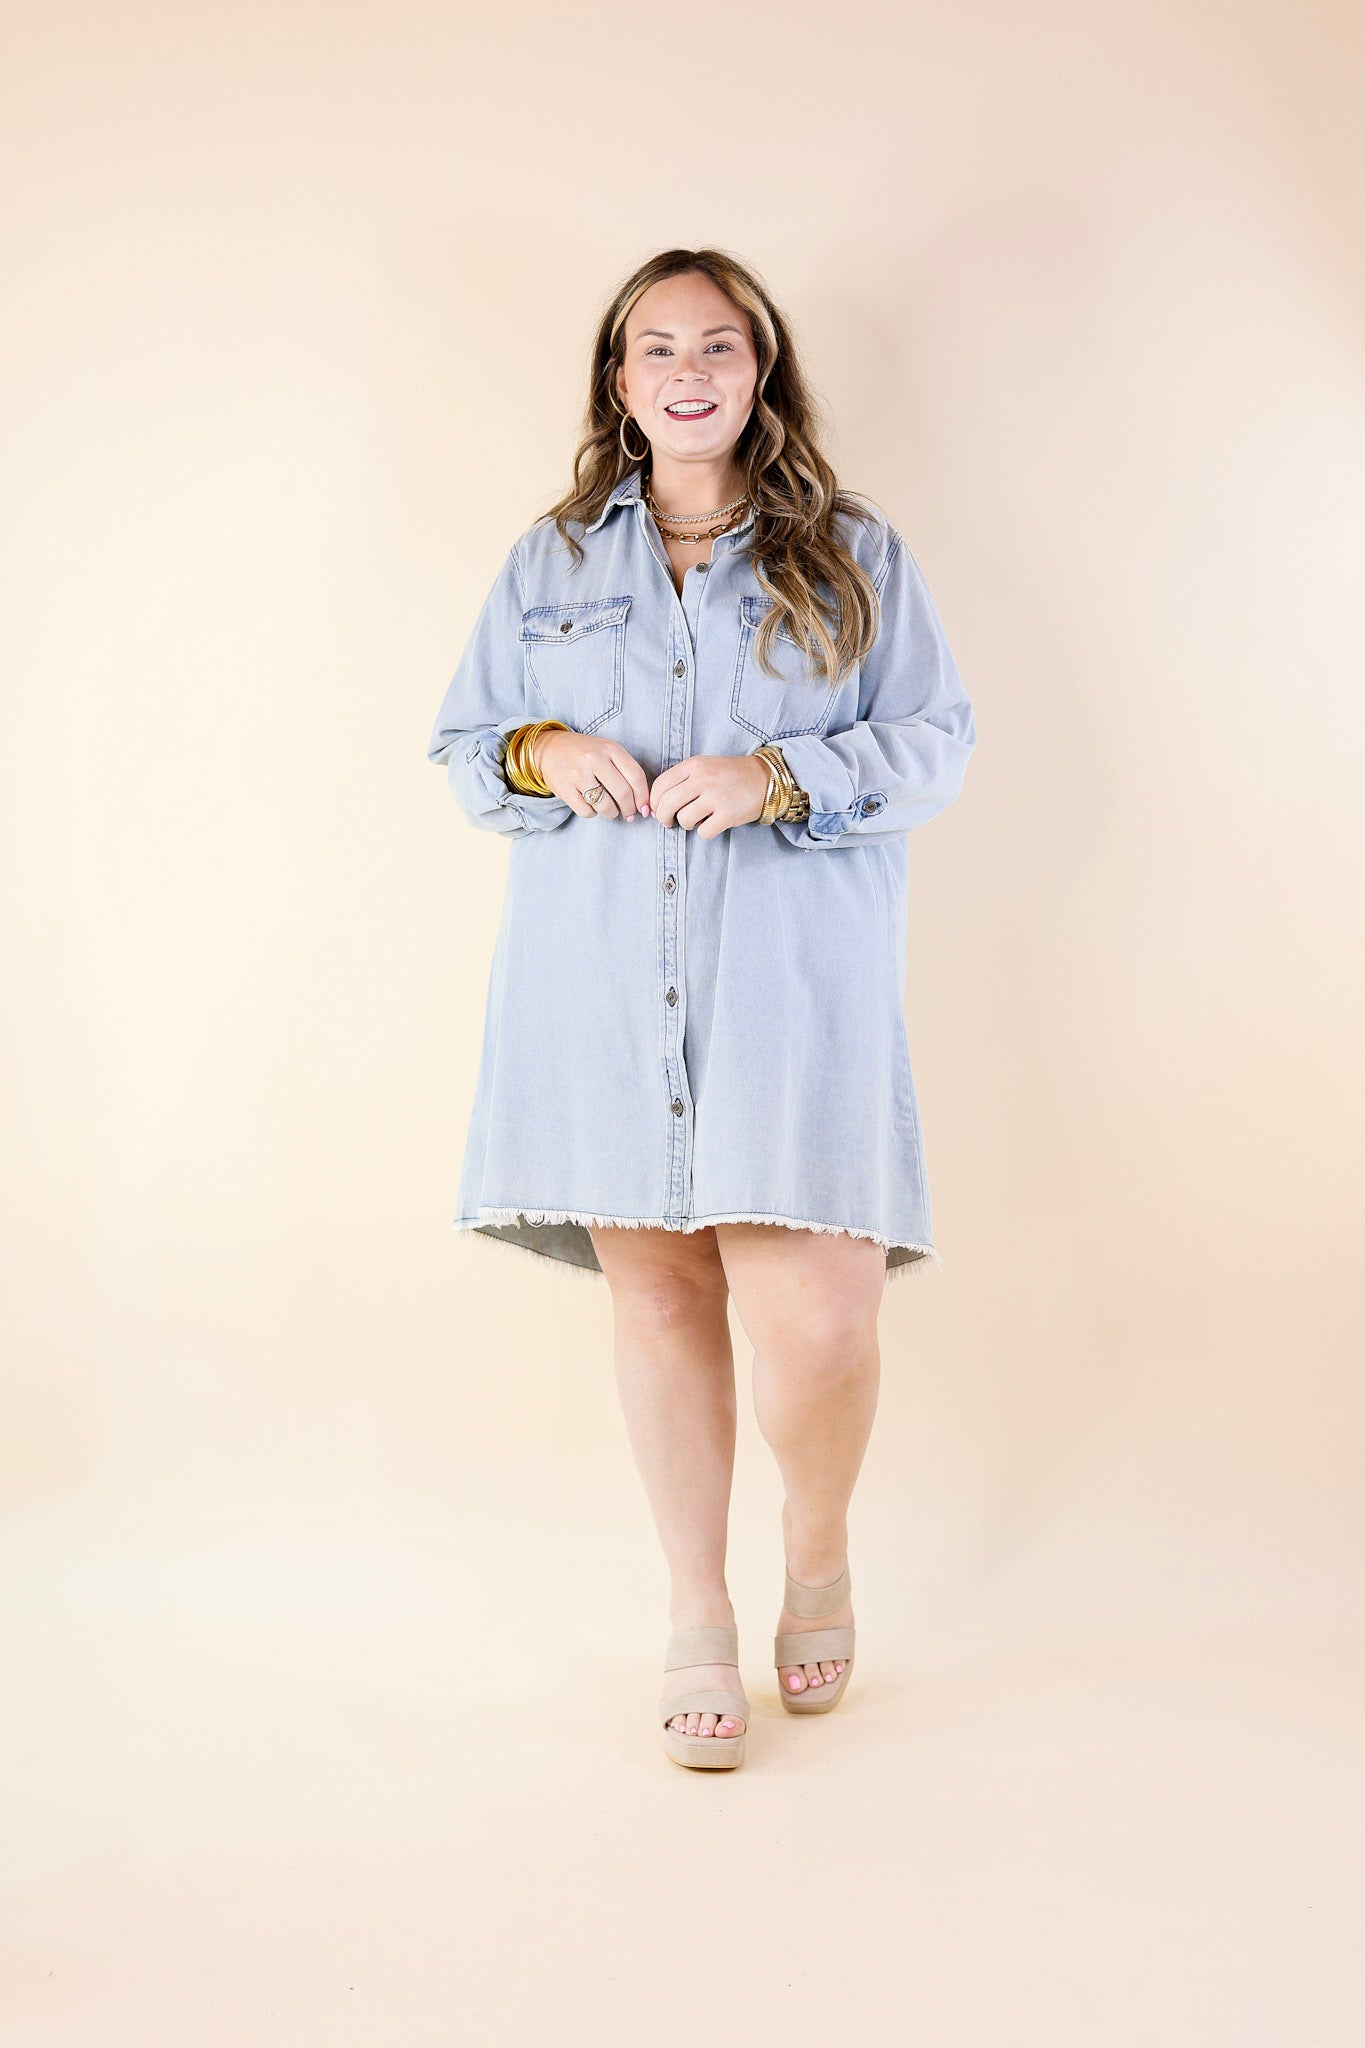 Patio Date Button Up Long Sleeve Denim Dress in Light Wash - Giddy Up Glamour Boutique